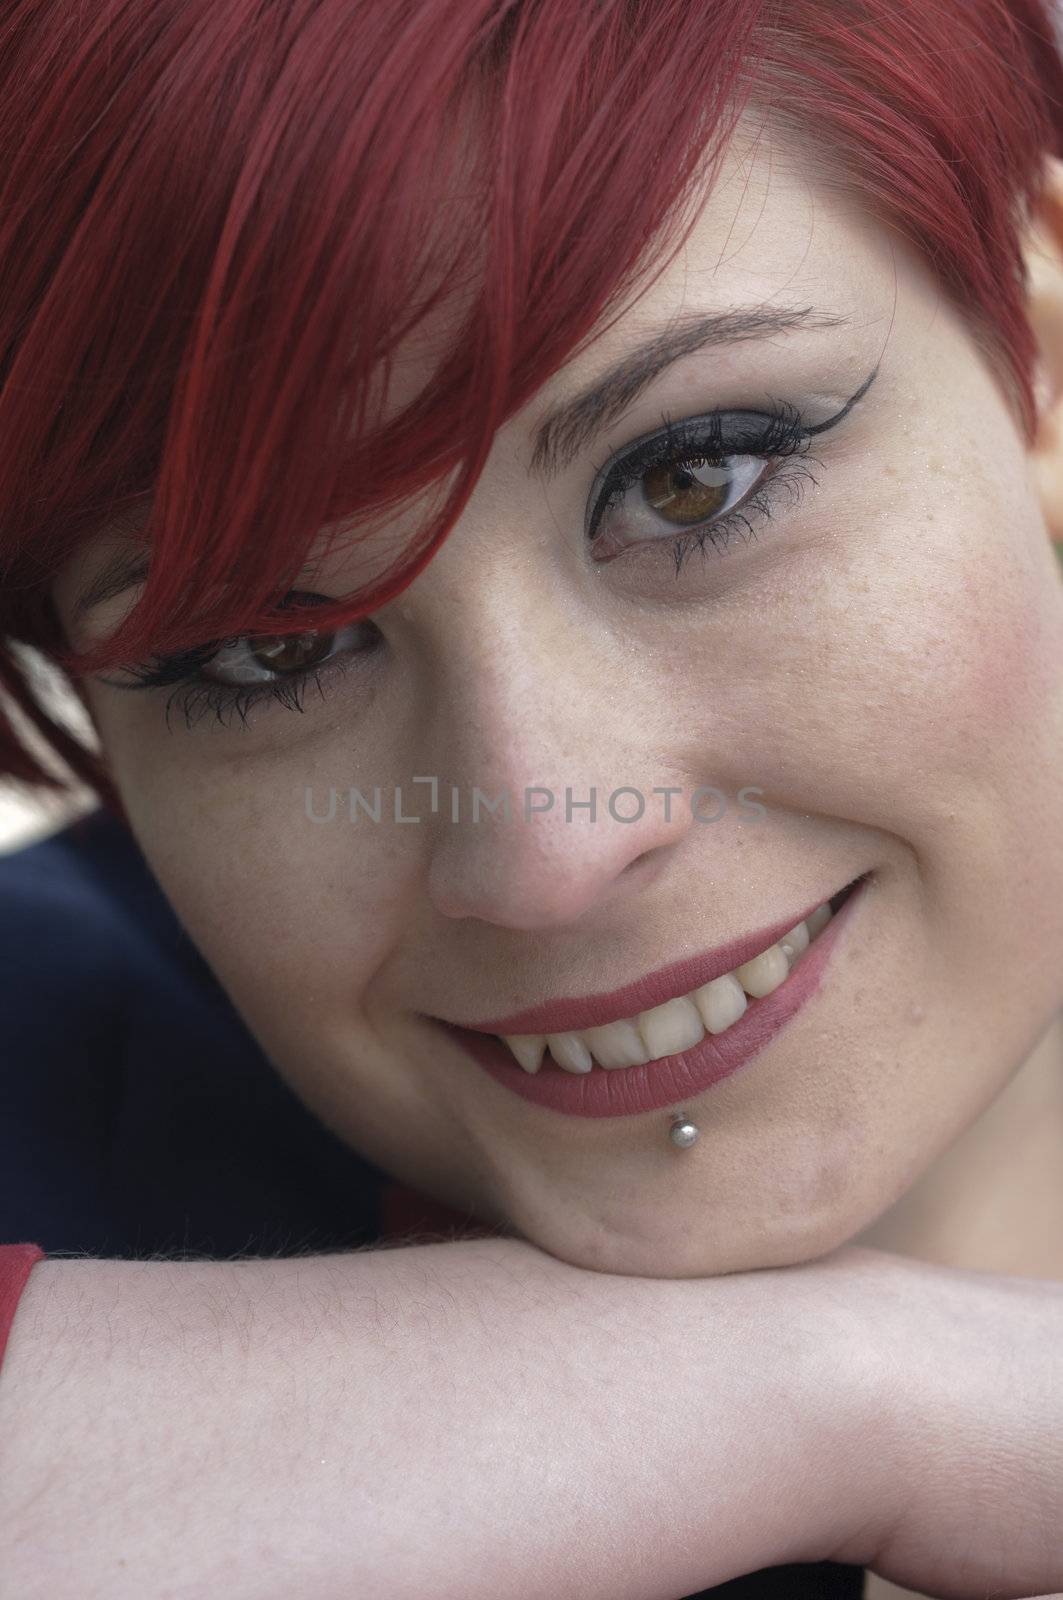 Portrait of a girl with red hair, piercing on lower lip, and smiling.